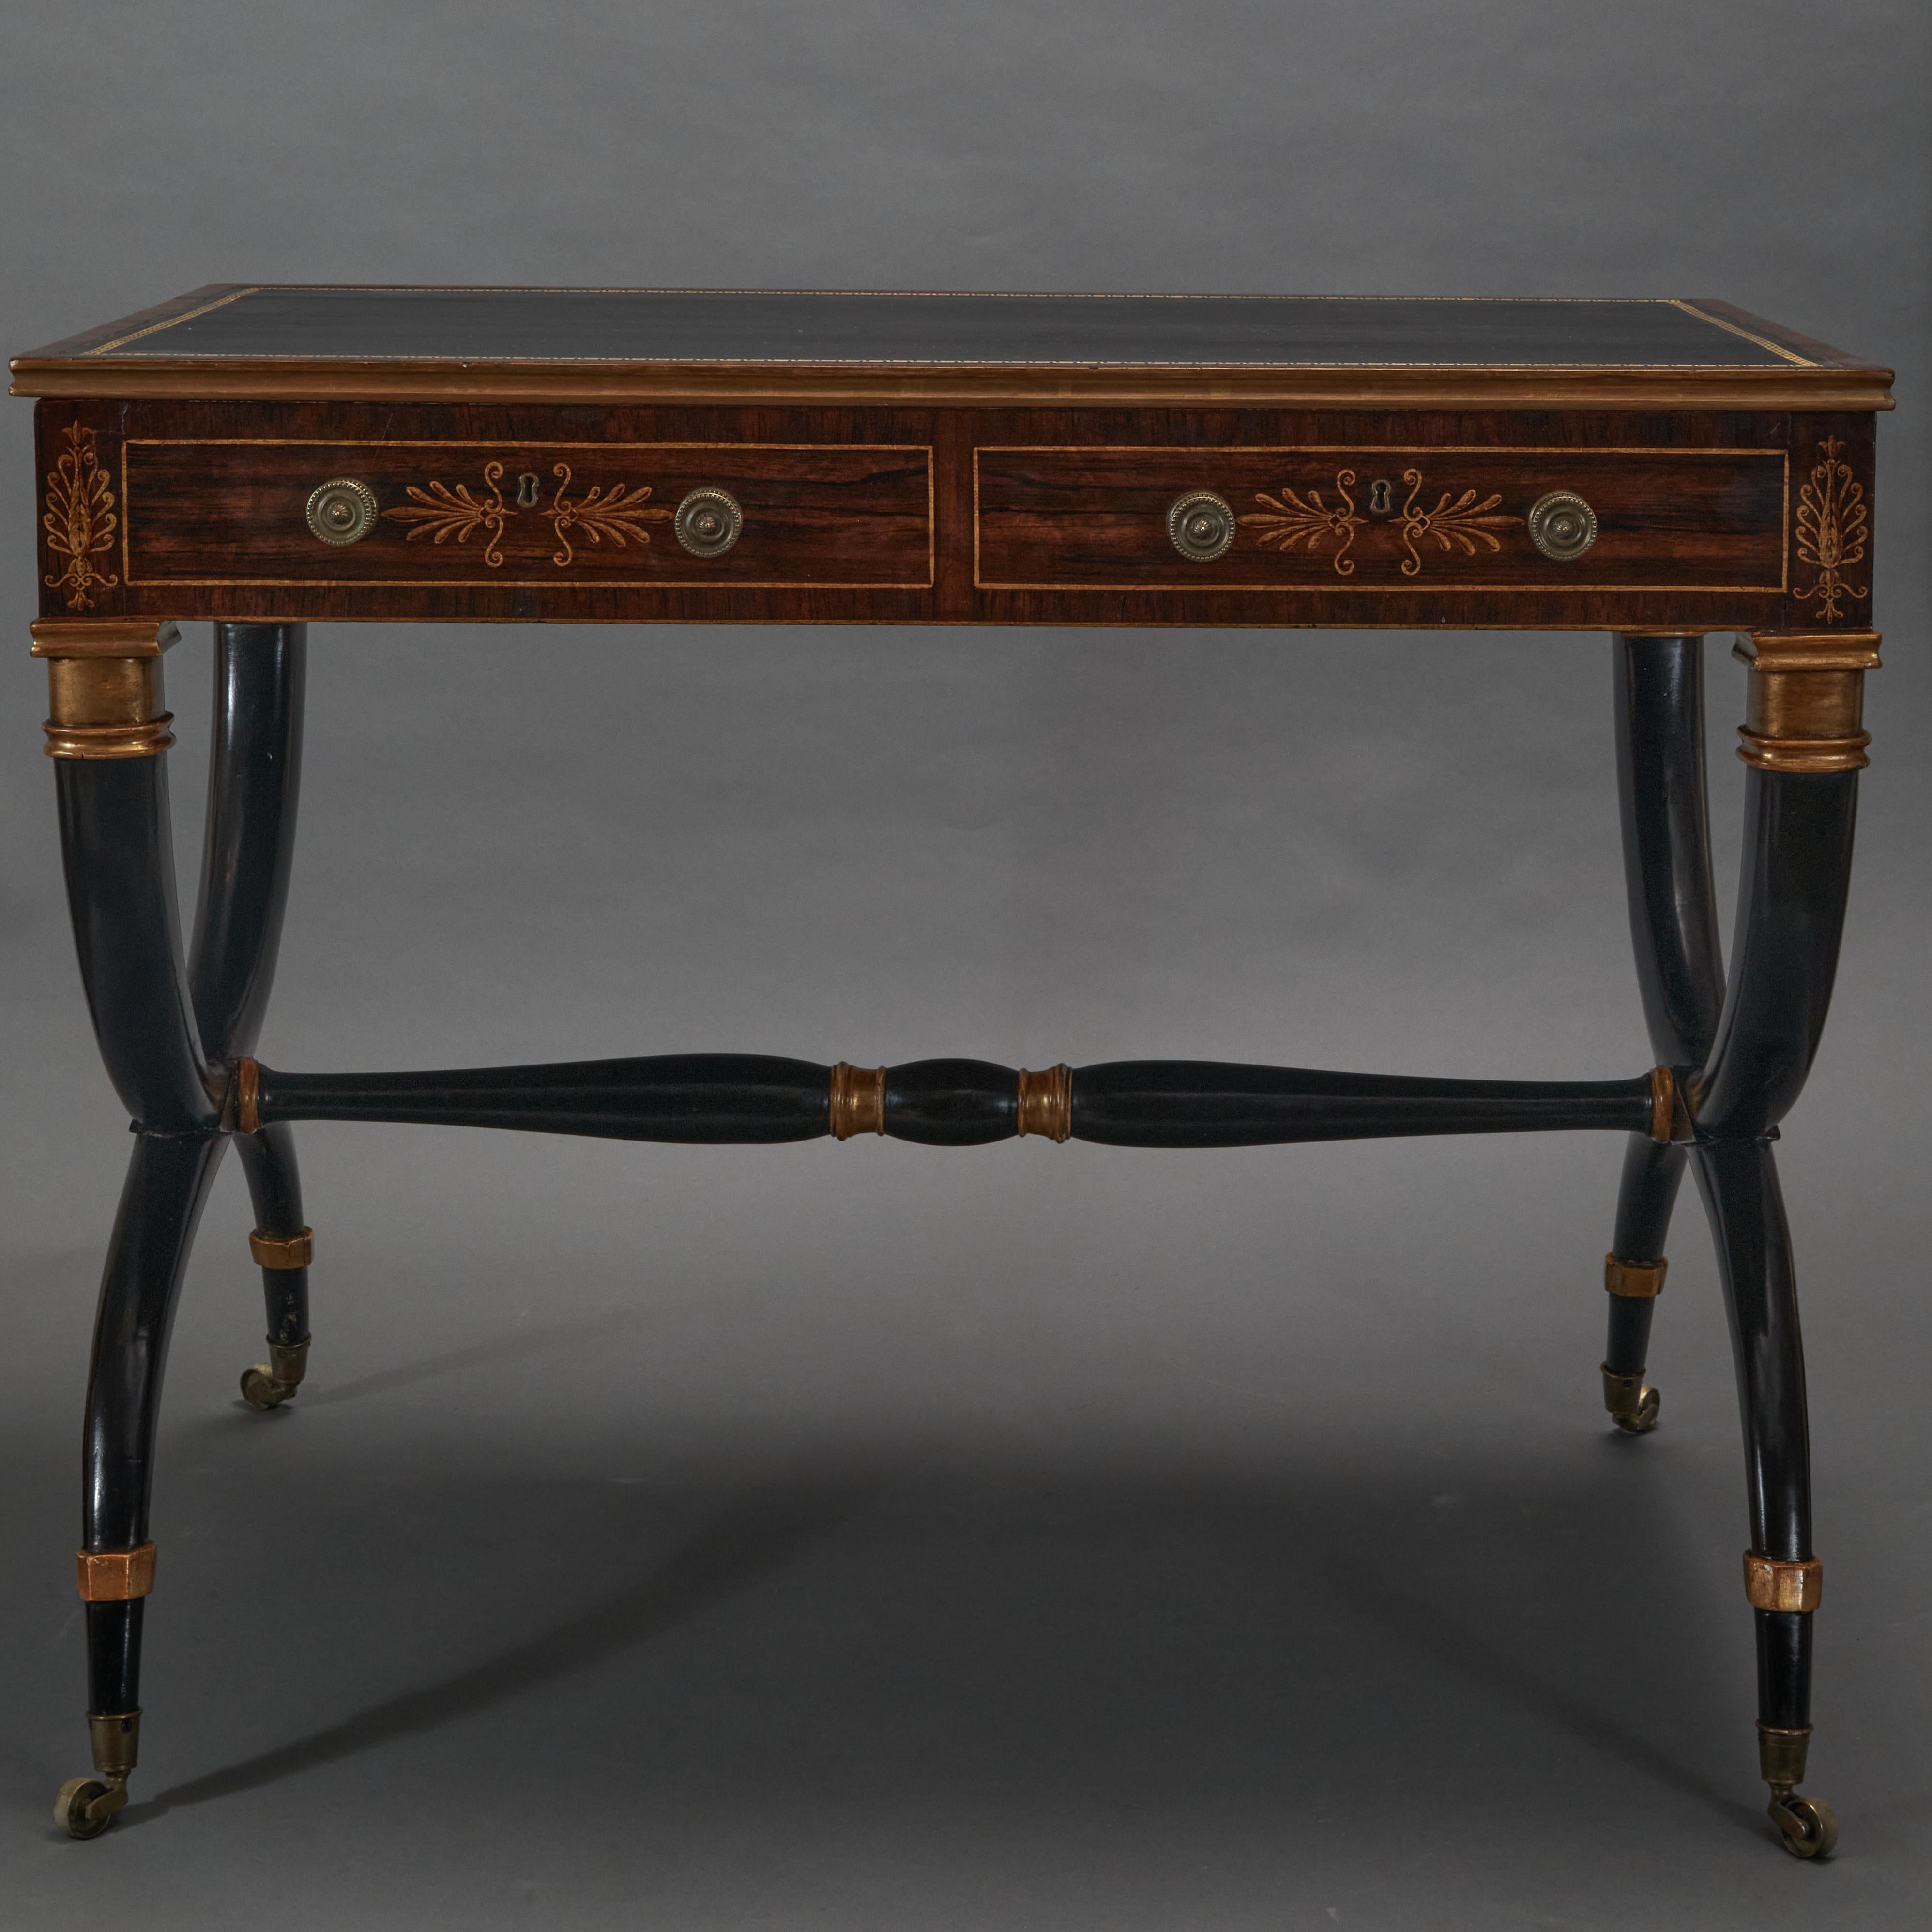 Ebonized and Parcel-Gilt with black leather top and gilded greek key design trim.  2 drawers on front and 2 false drawers on backside.  With original castors and hardware.    